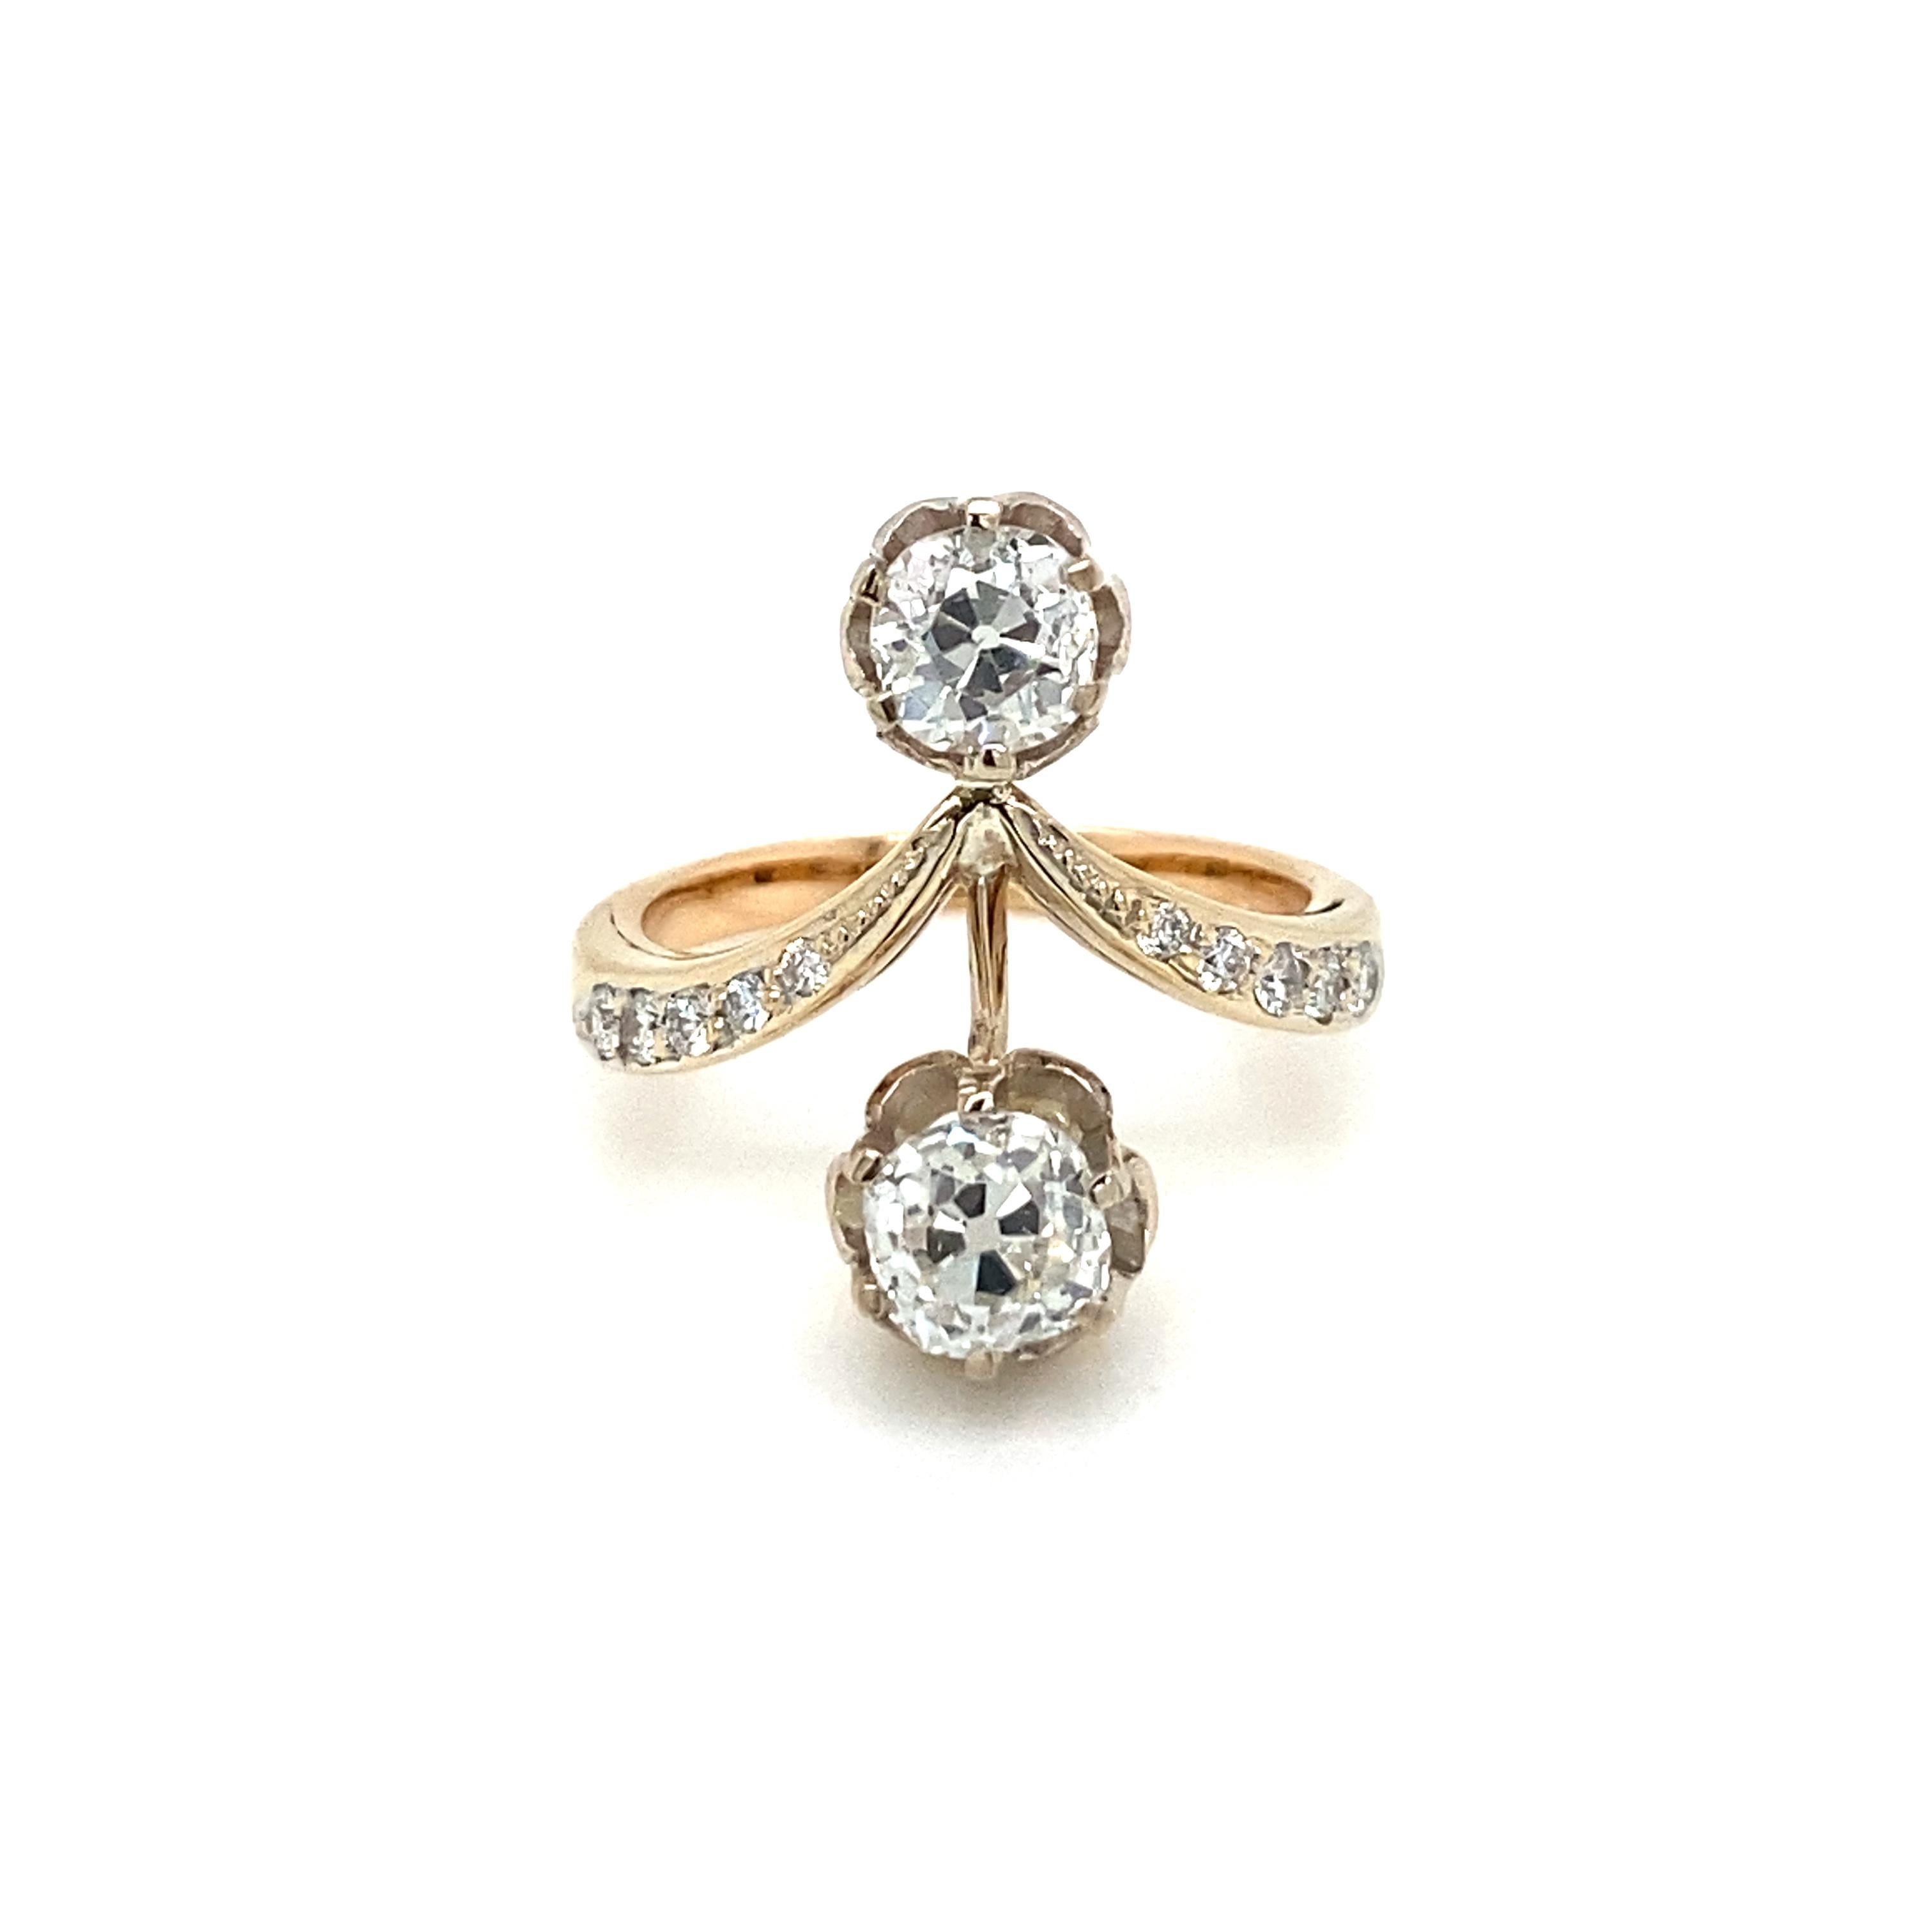 This Beautiful Authentic 18k gold 'Vous et Moi' ring is set with two large Sparkling Old mine cut diamonds, the largest weighs 1.10 ct., graded G/H color Vs1, the smallest weighs  0.50 ct., graded G/H color Vs1, The mount is enriched by old cut